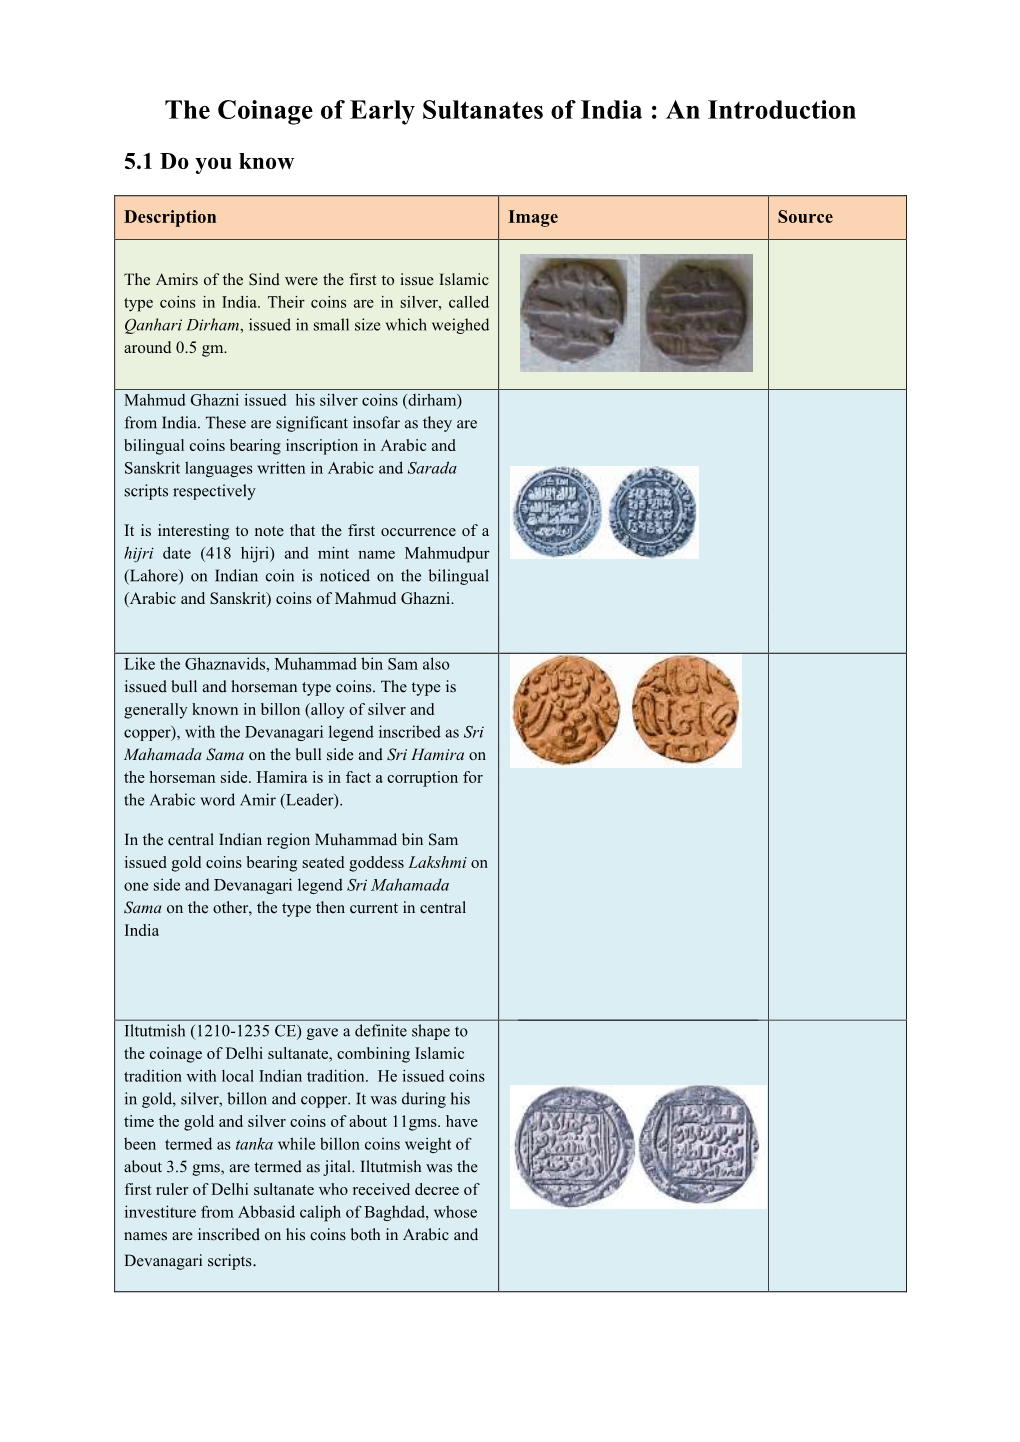 The Coinage of Early Sultanates of India : an Introduction